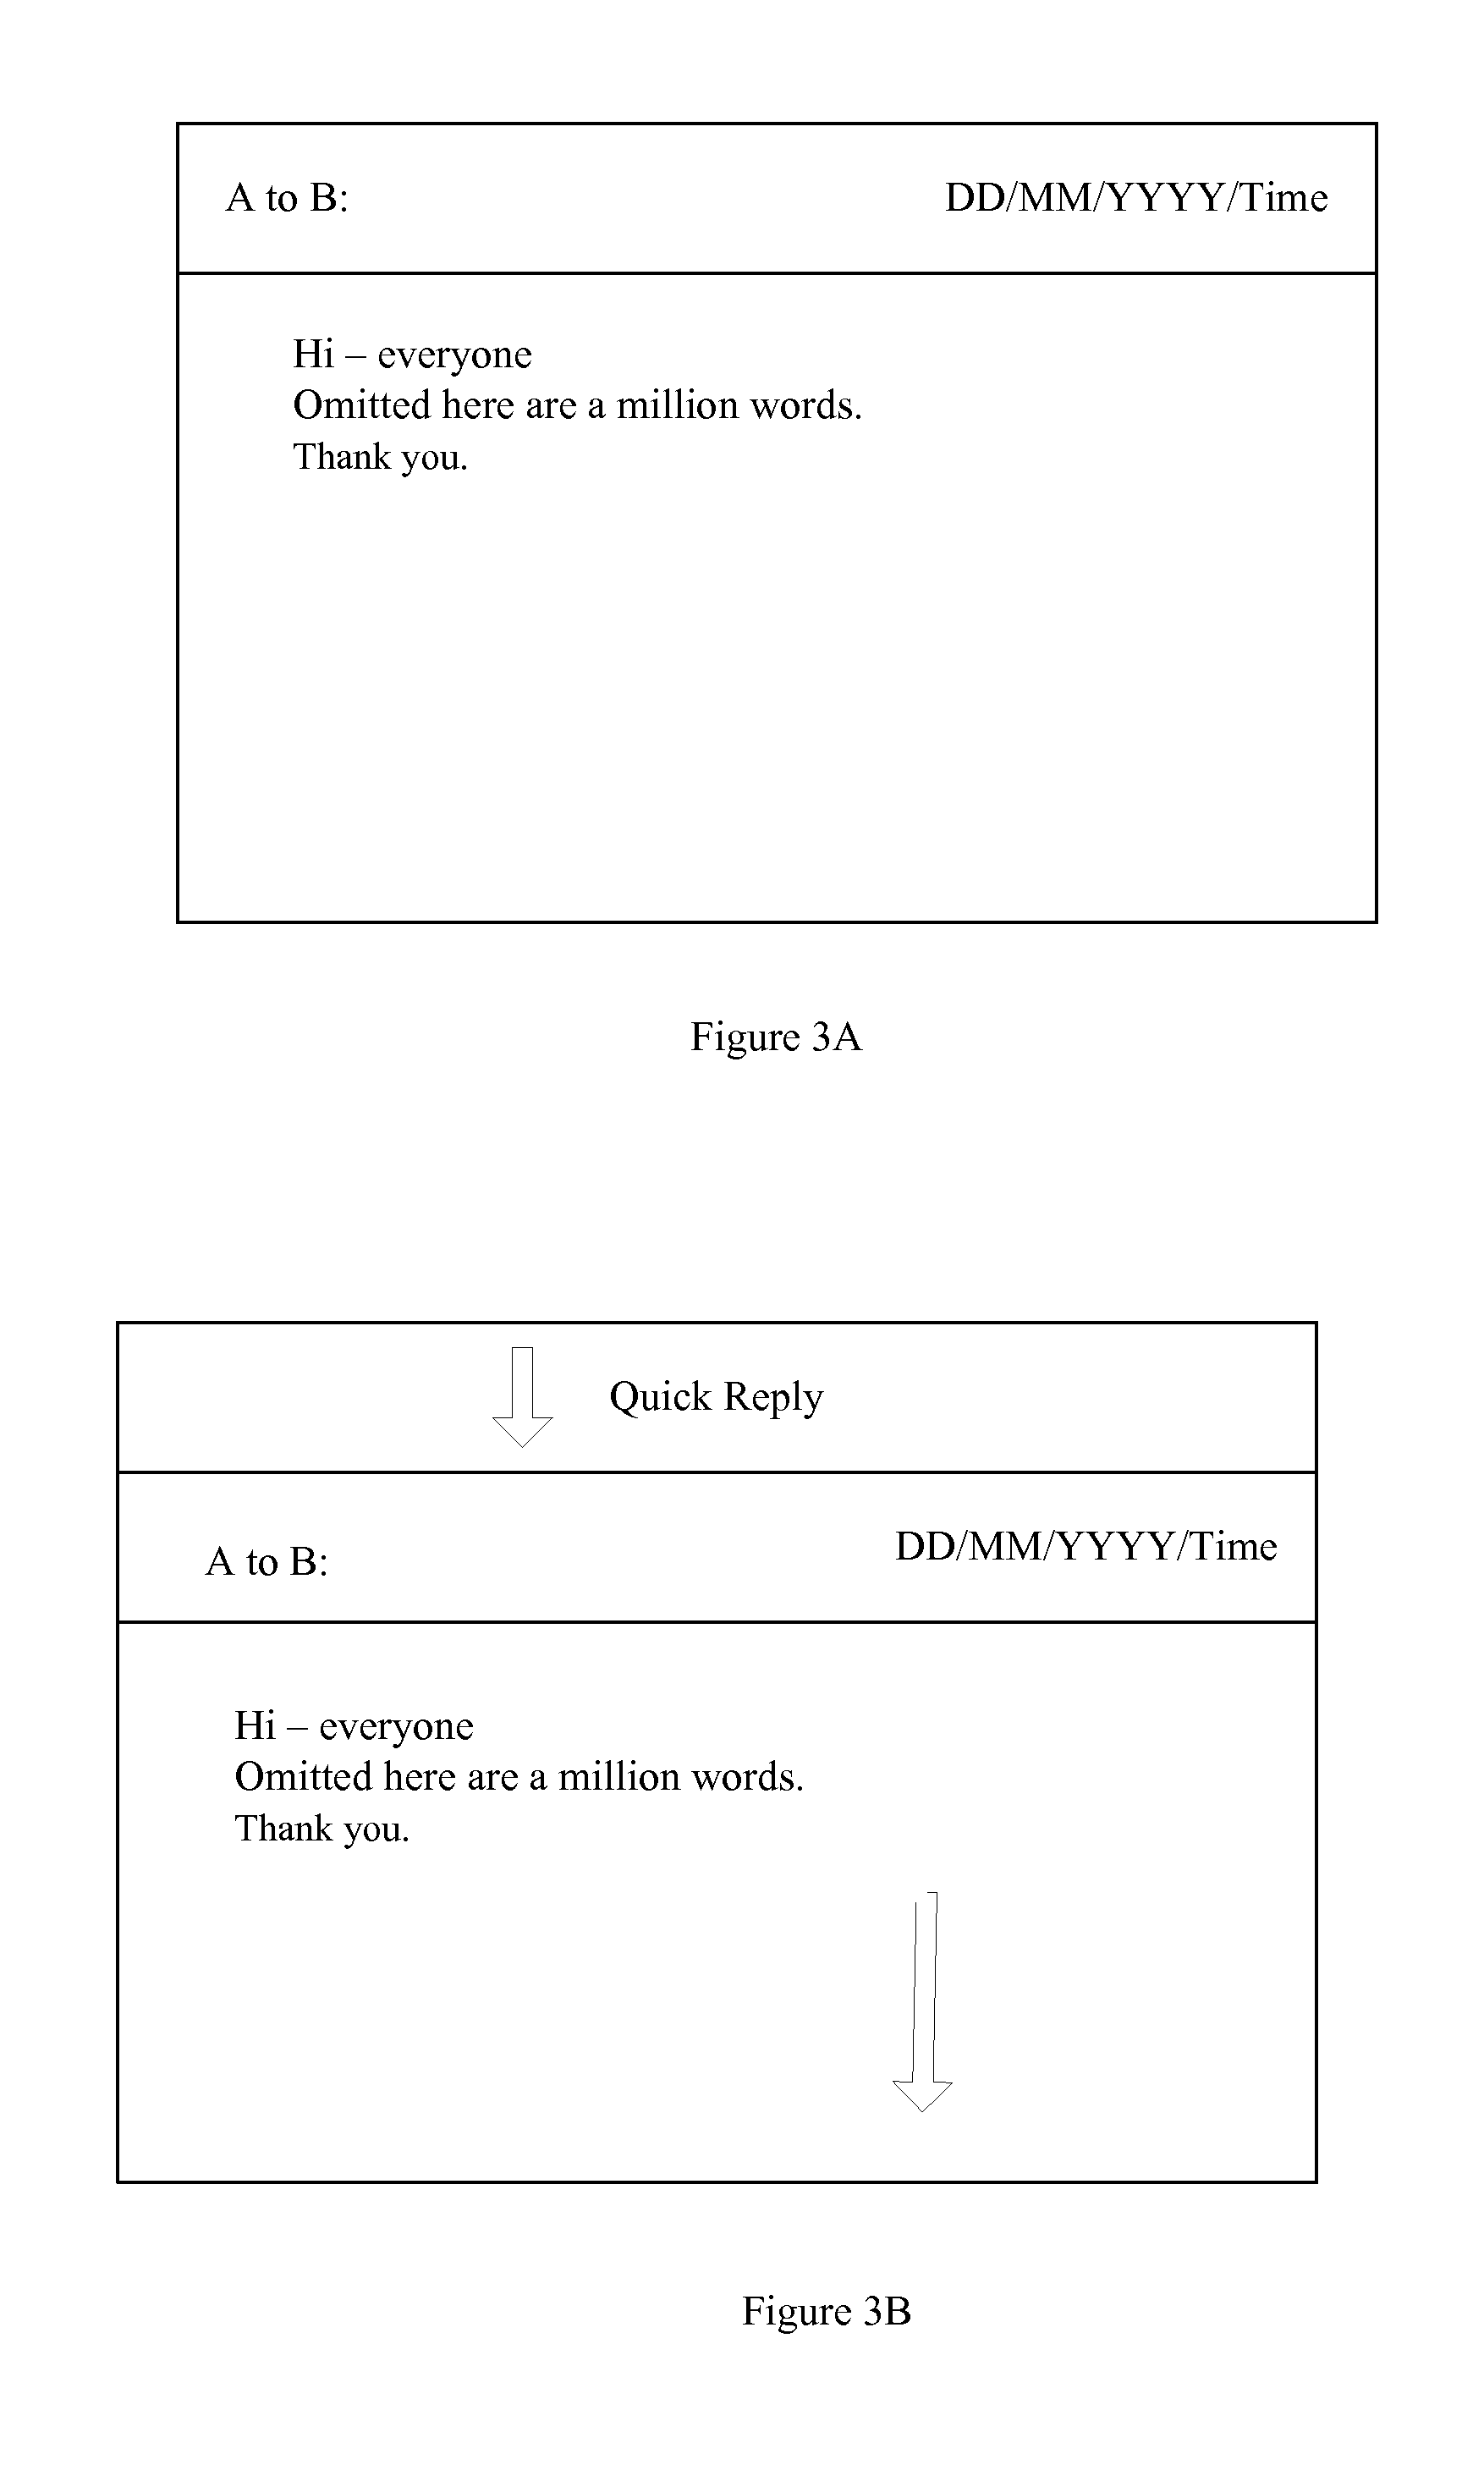 Methods and systems for quick reply operations